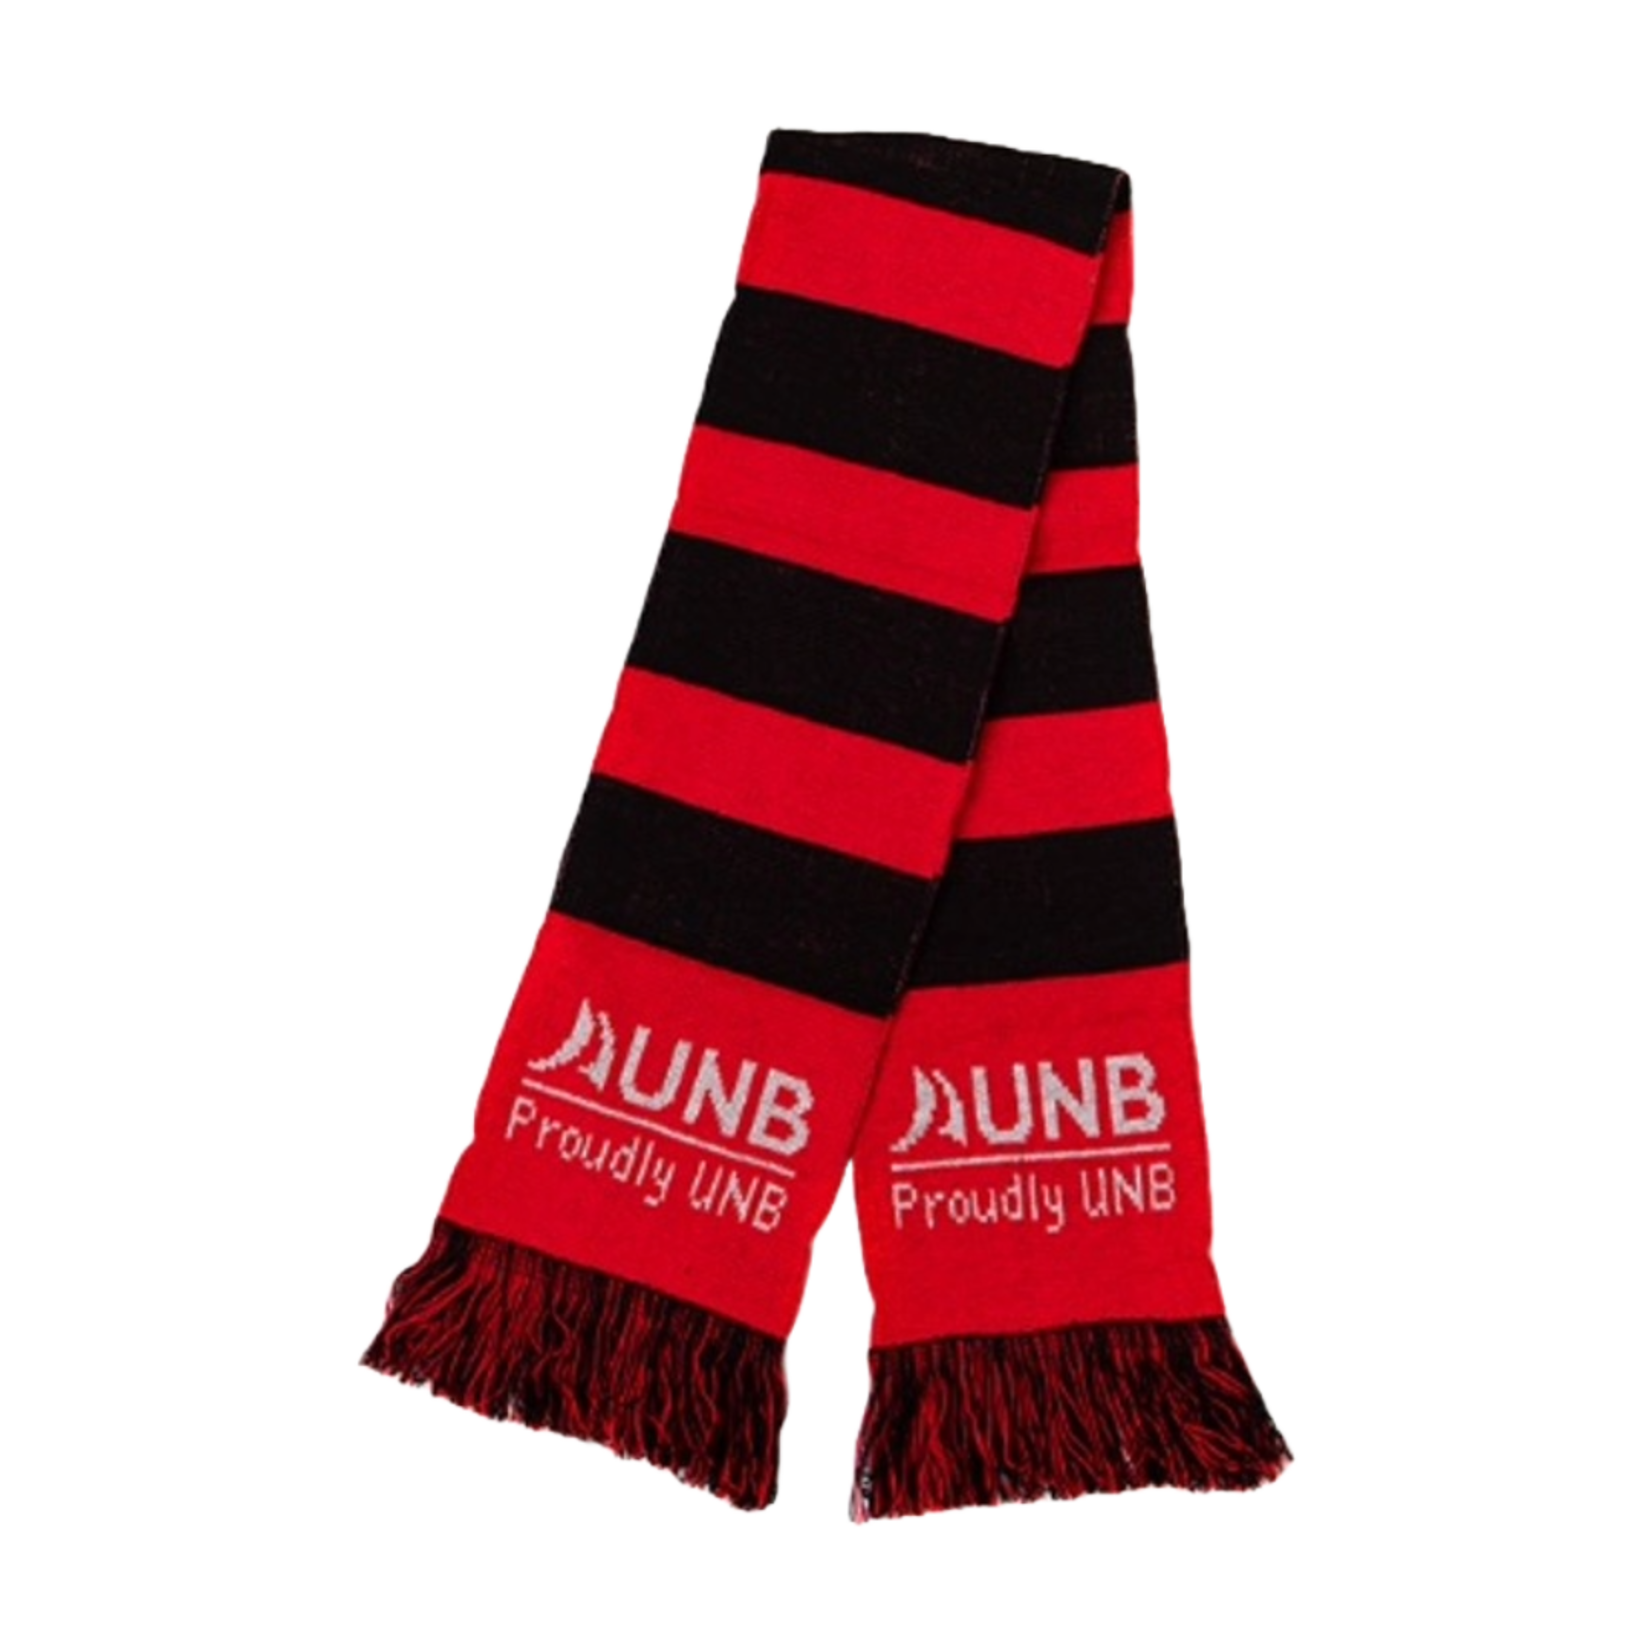 Proudly UNB Proudly UNB Scarf - Black & Red